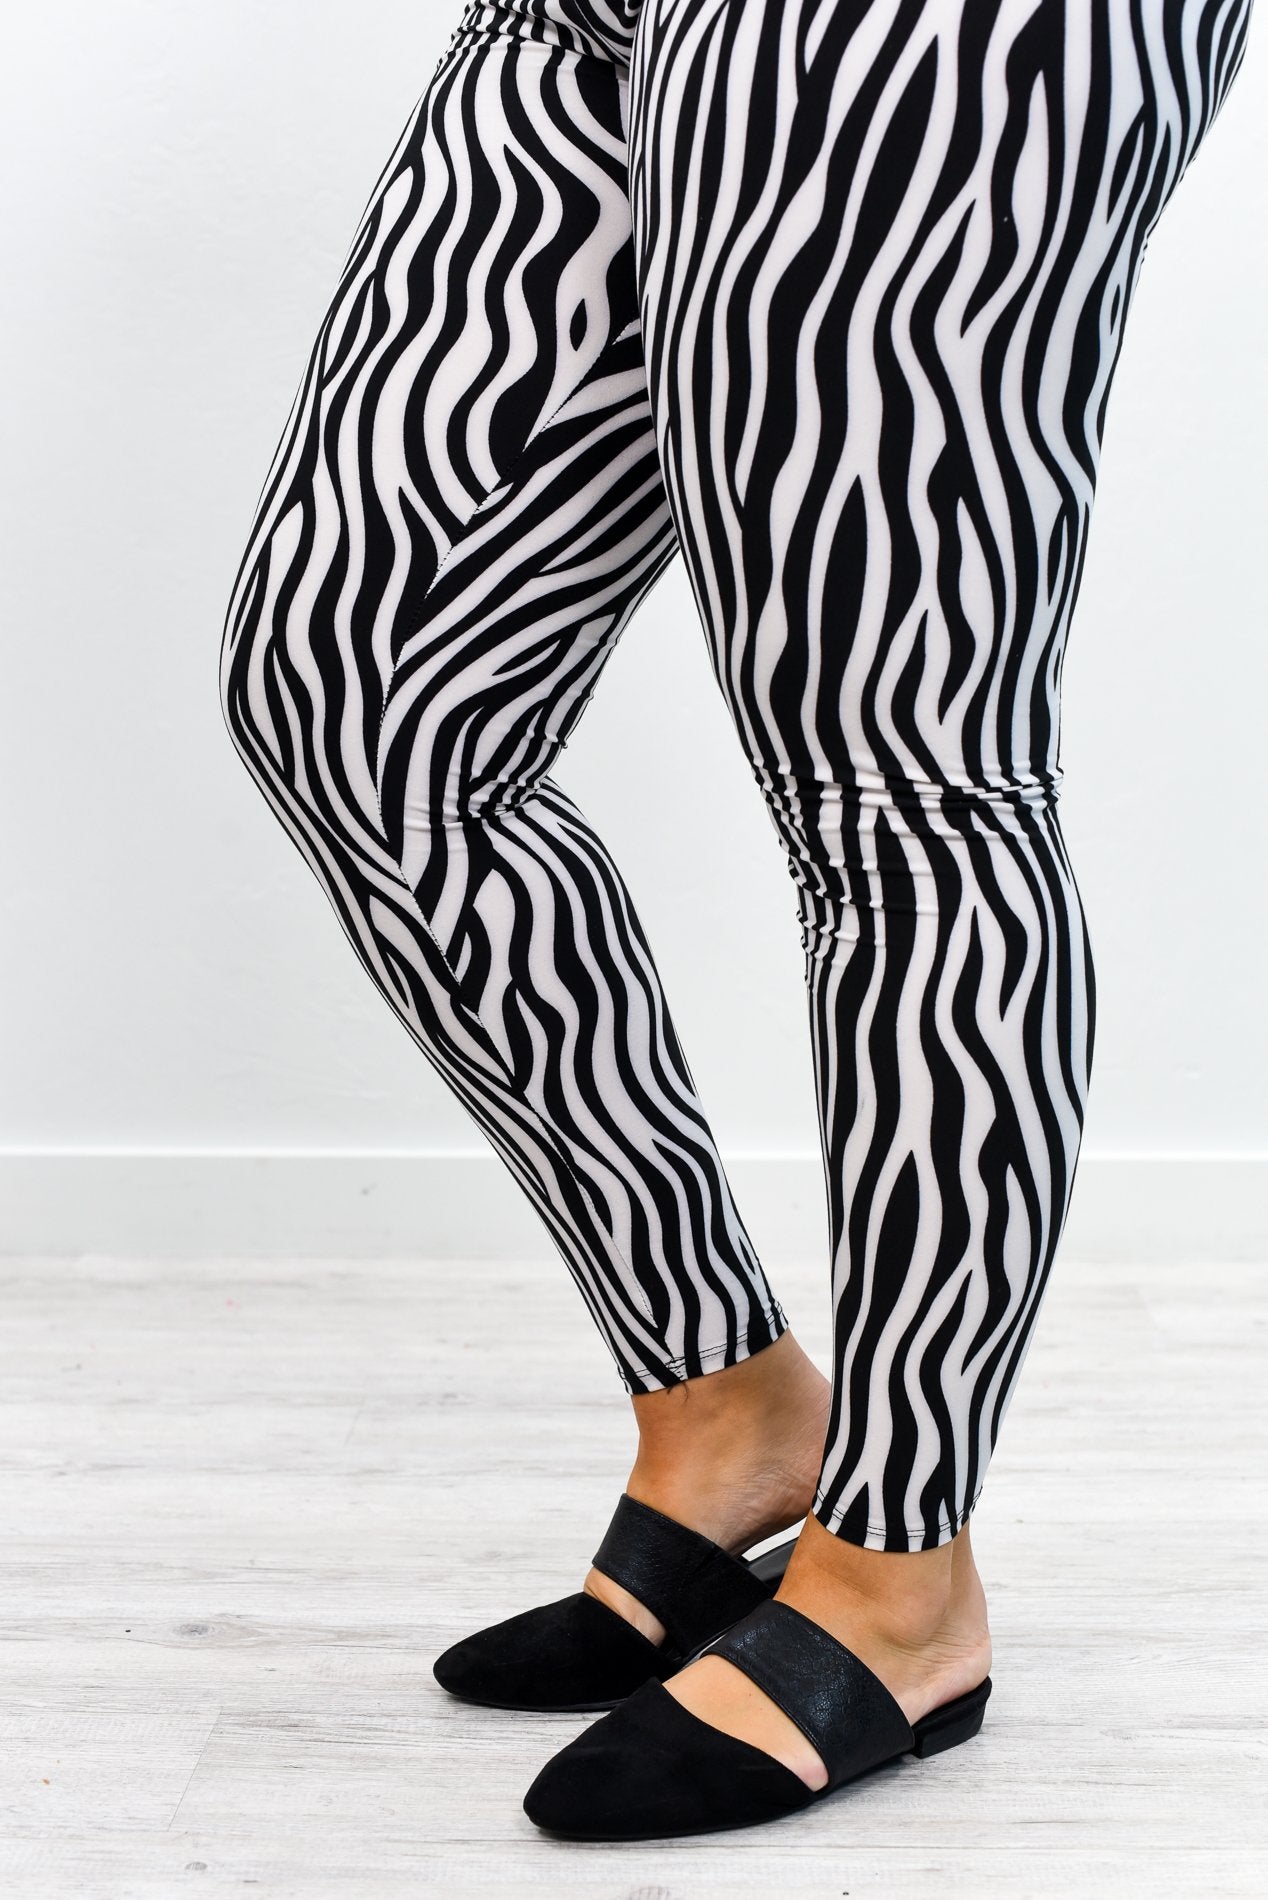 STRIPED - VERTICAL - BLACK AND WHITE - ONE-SIZE - LEGGING